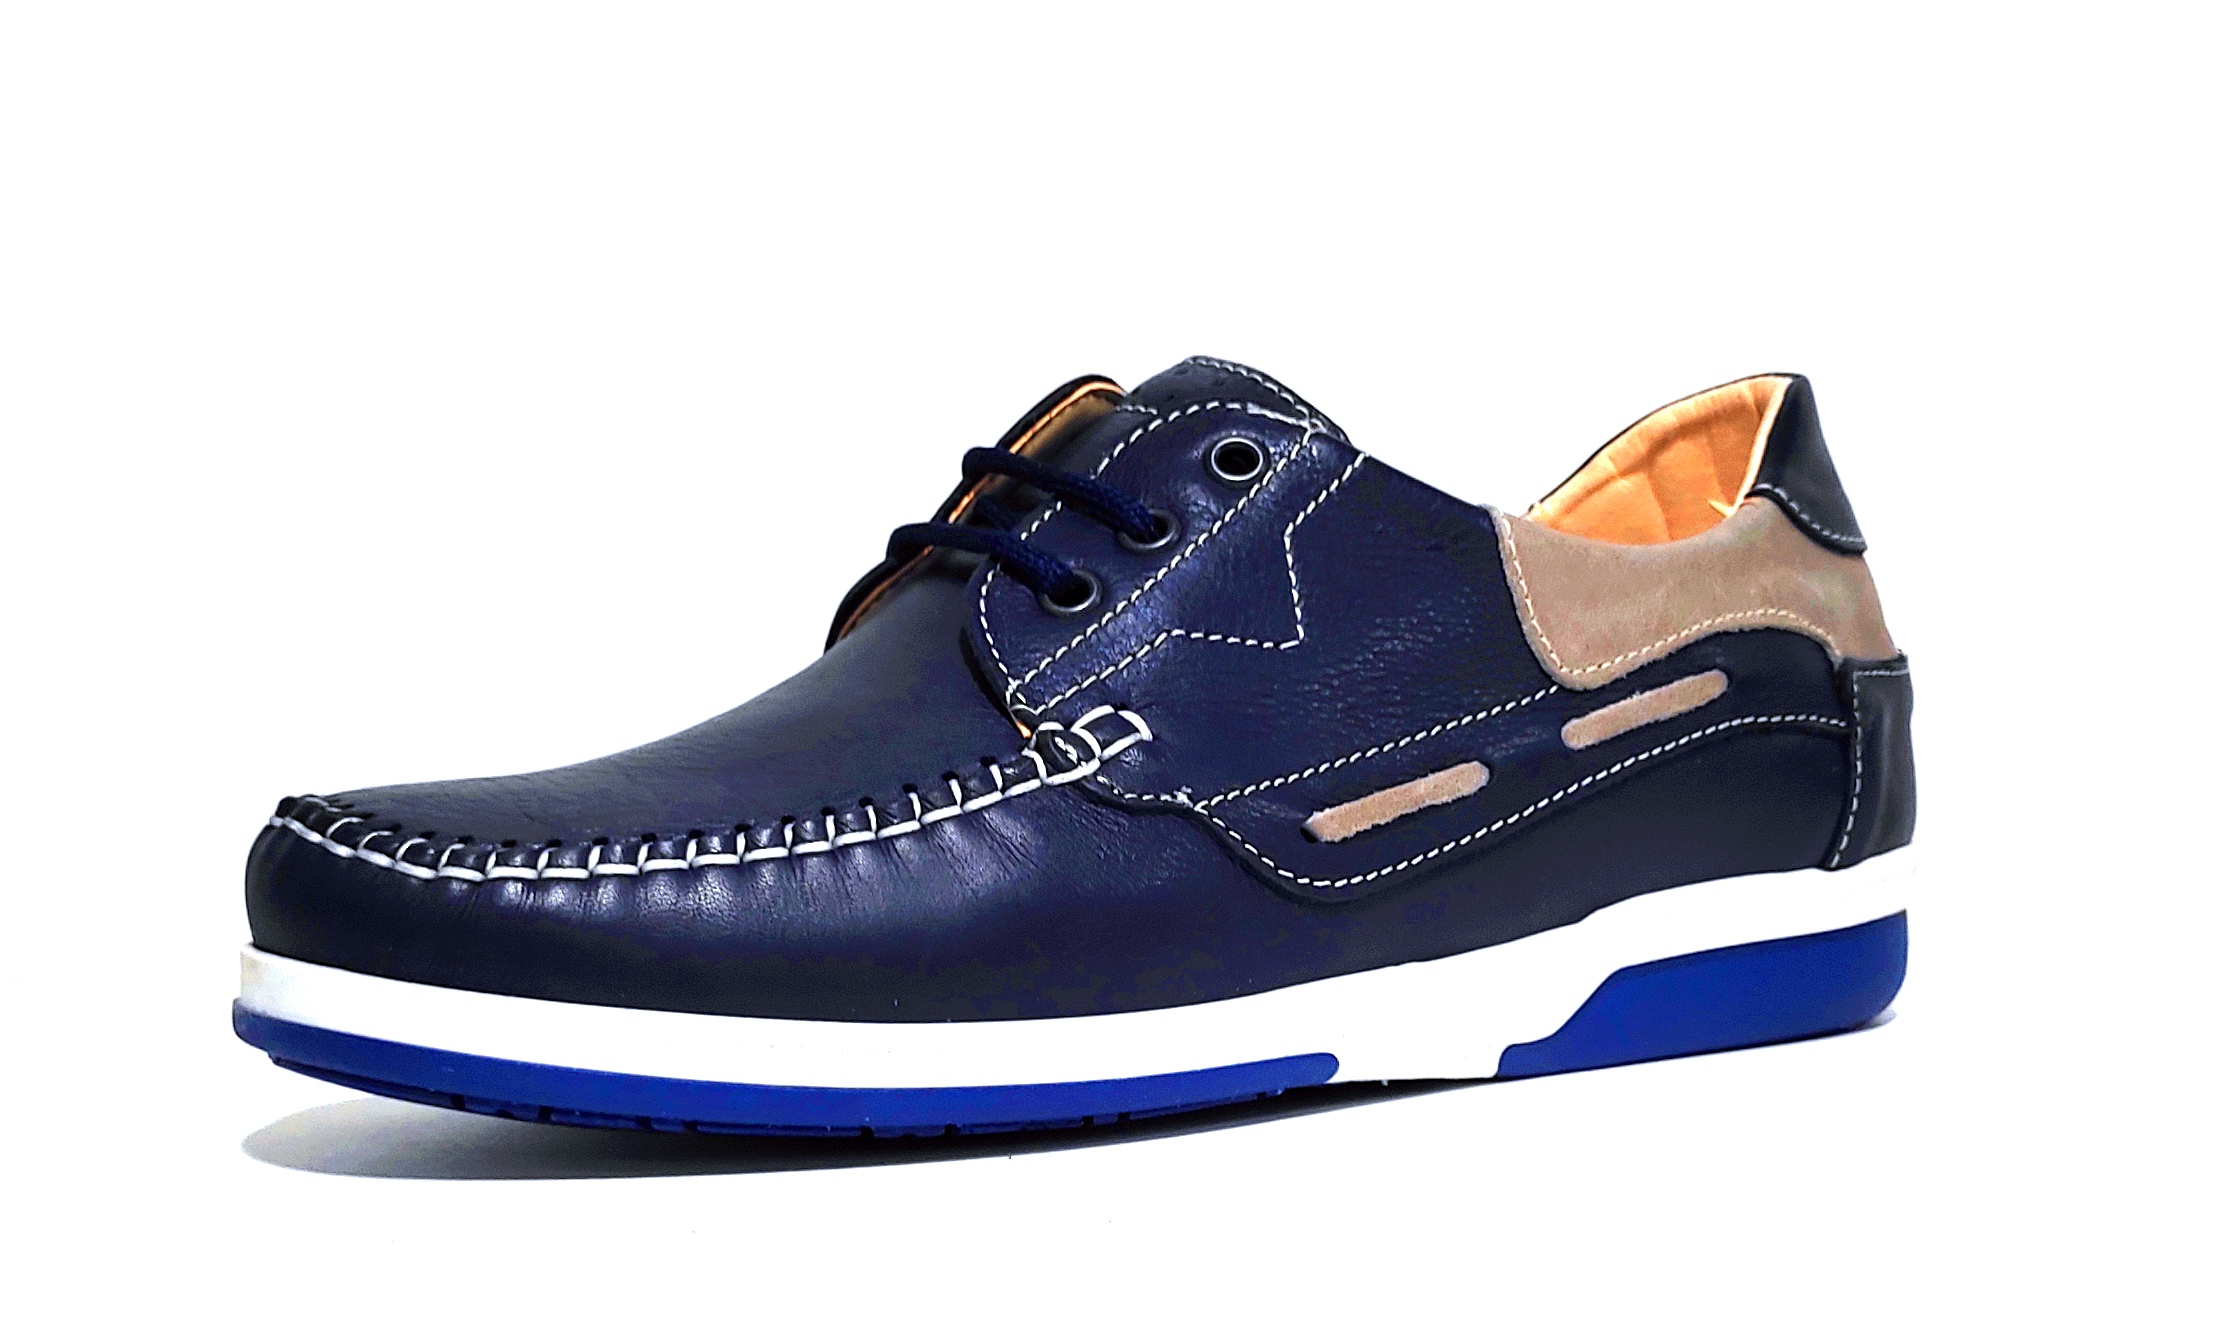 ready fashion crispino 410 shoe blue real leather laced men's summer shoes mad - Picture 1 of 1